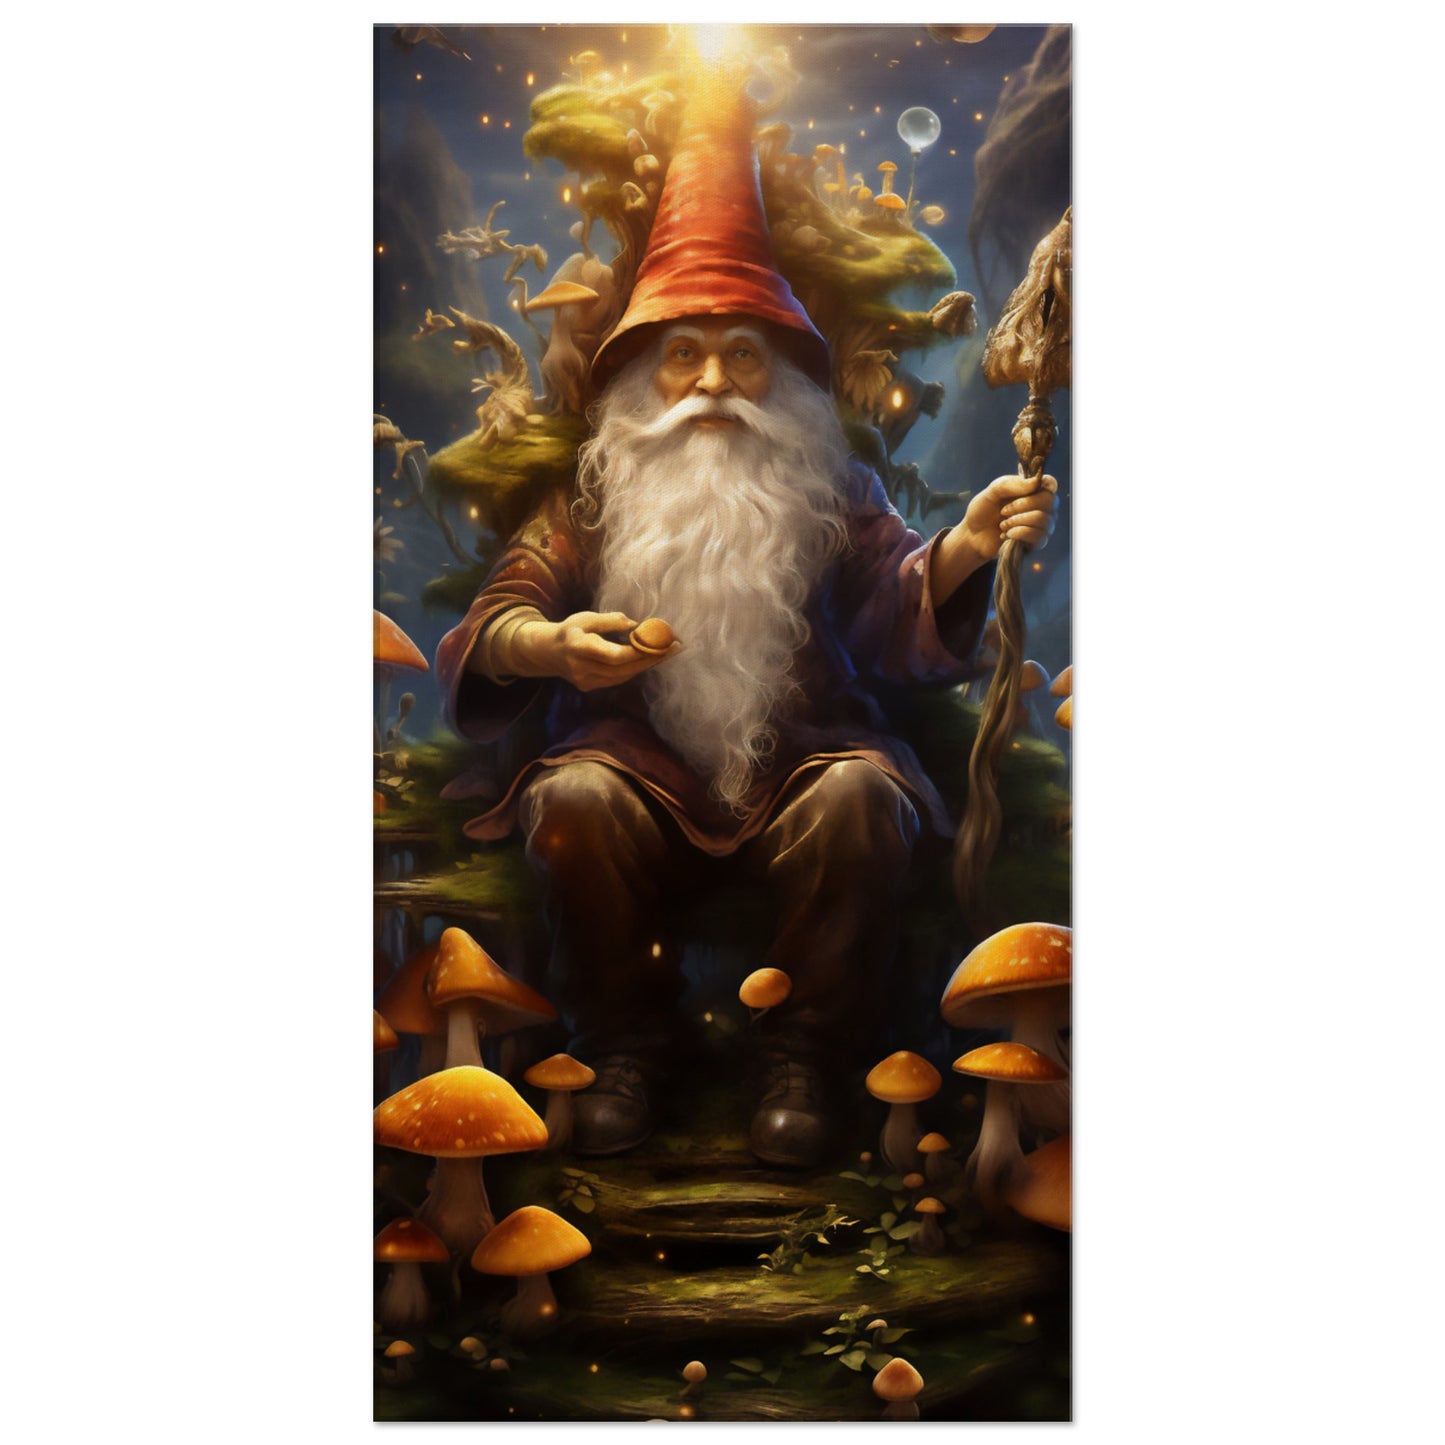 Psychedelic Art Mushroom Wizard Canvas Wall Decor - Magical Art for Enchanting Spaces